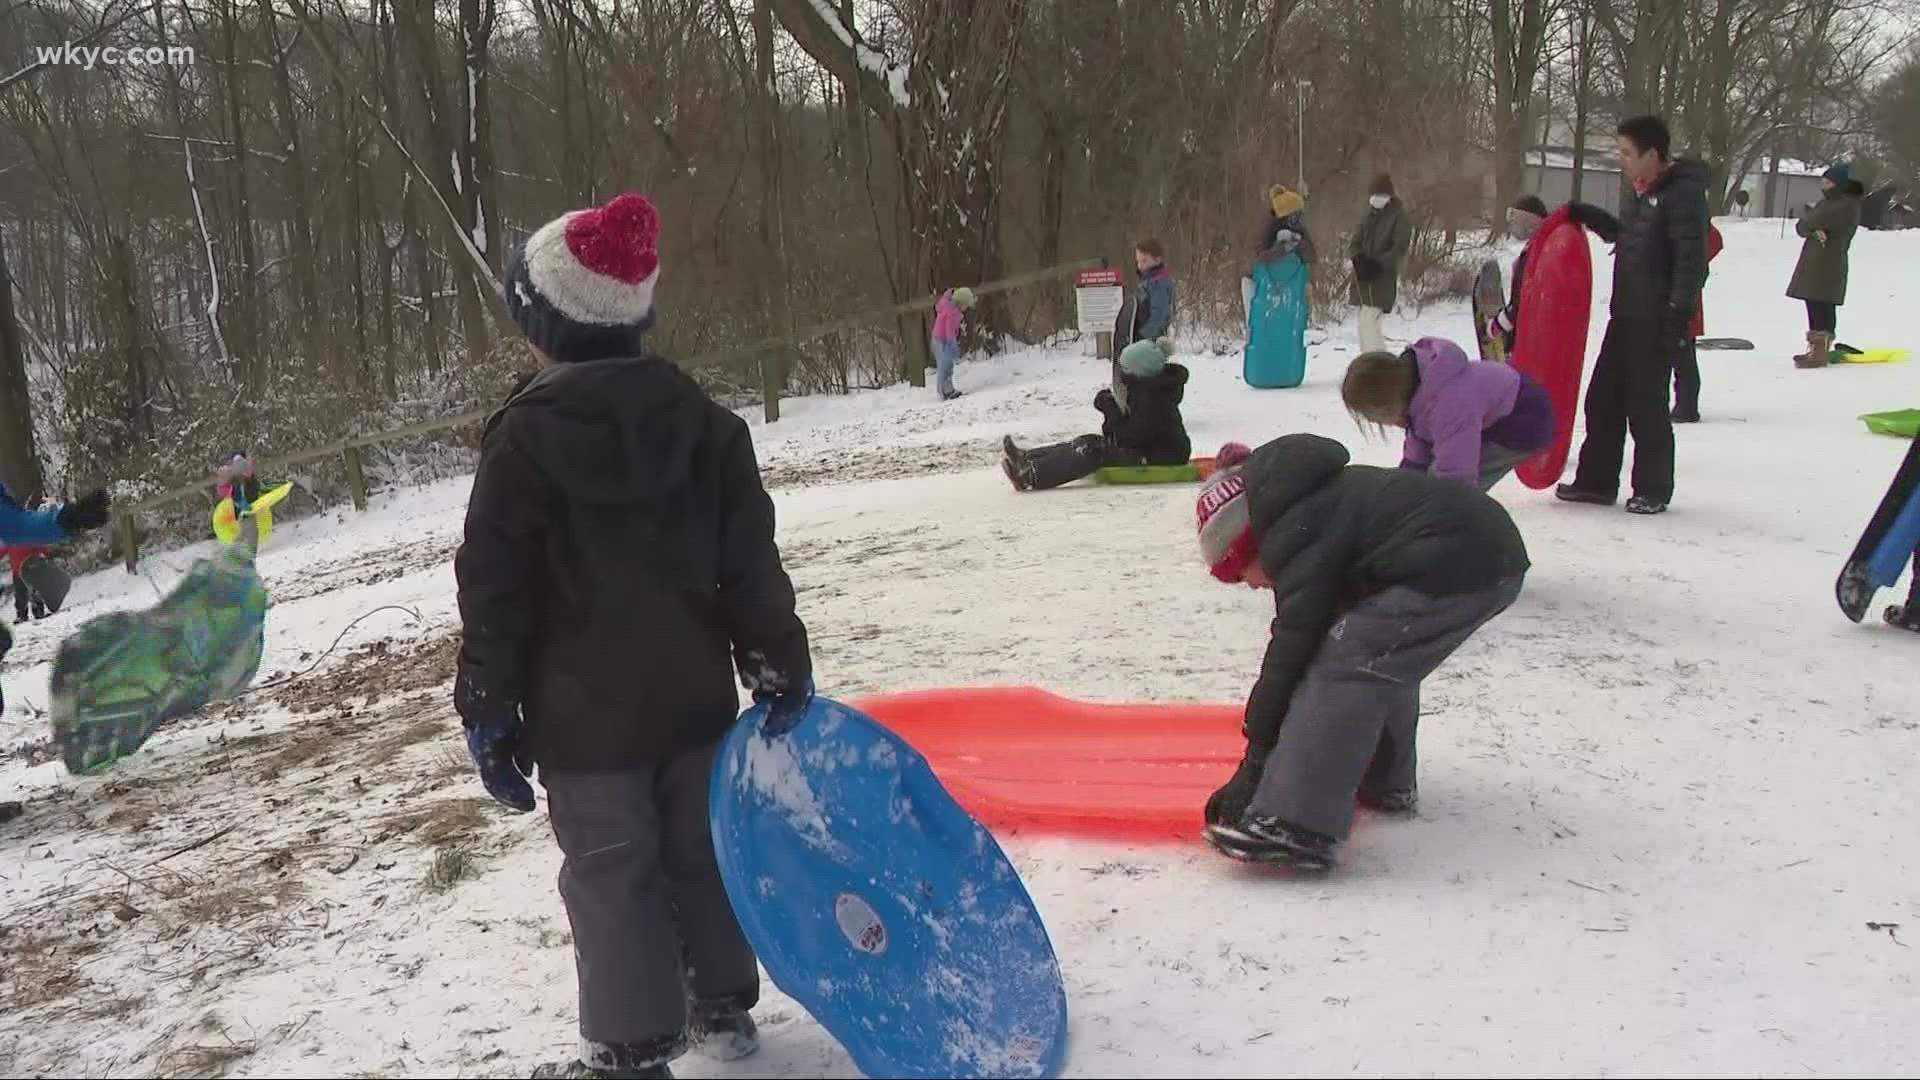 Did someone say SNOWDAY? That was the case for many throughout Northeast Ohio after yesterday’s snowstorm and the kids were loving it.